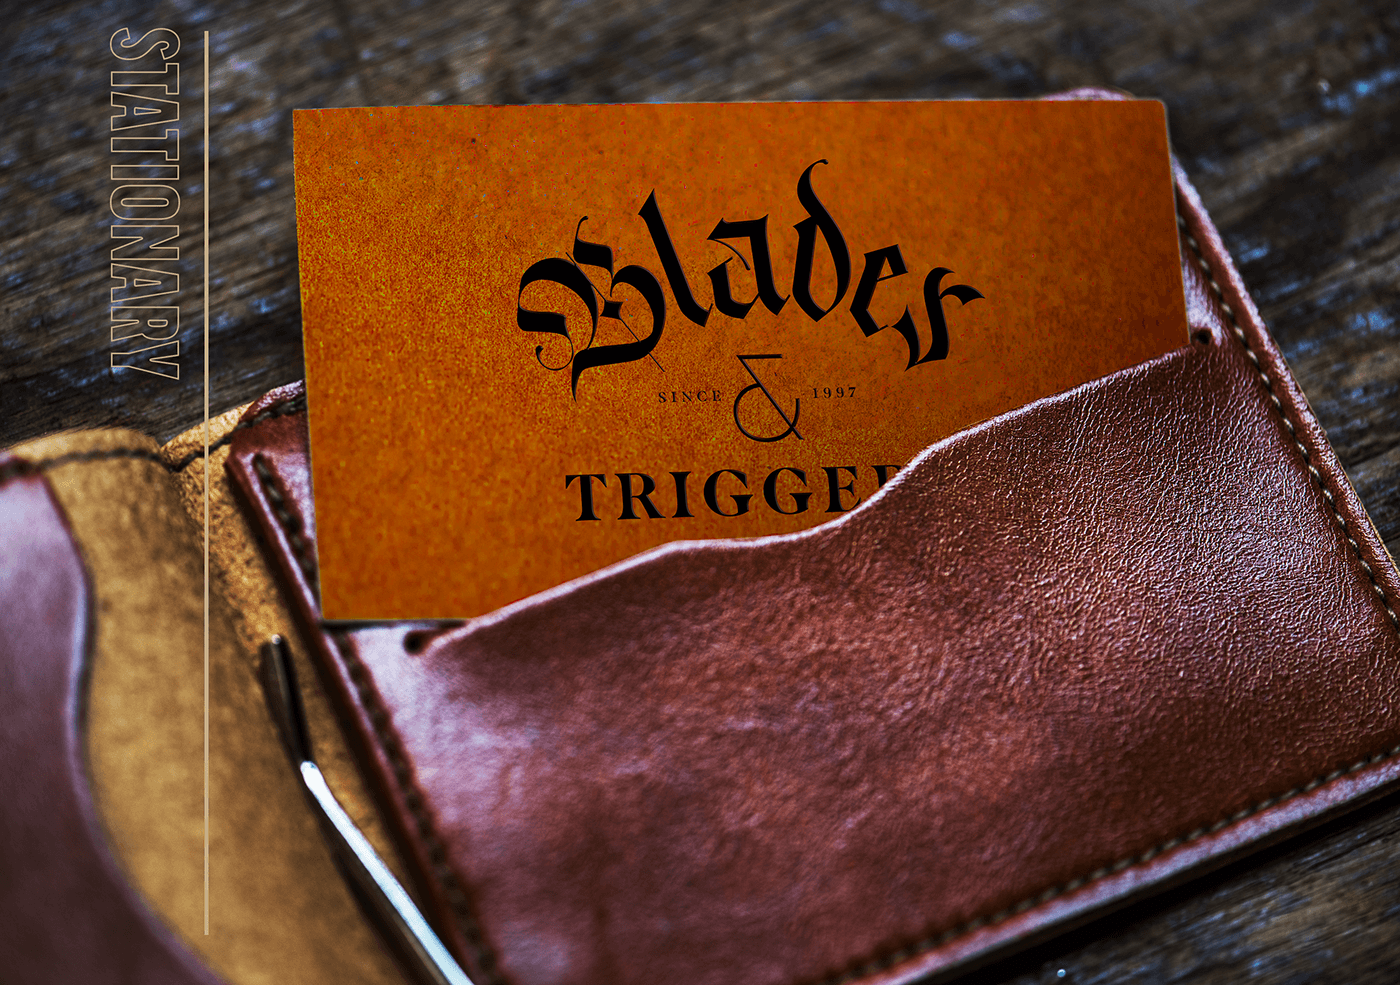 Business card reading “Blades & Trigger” in a leather wallet with “STATIONARY” above.